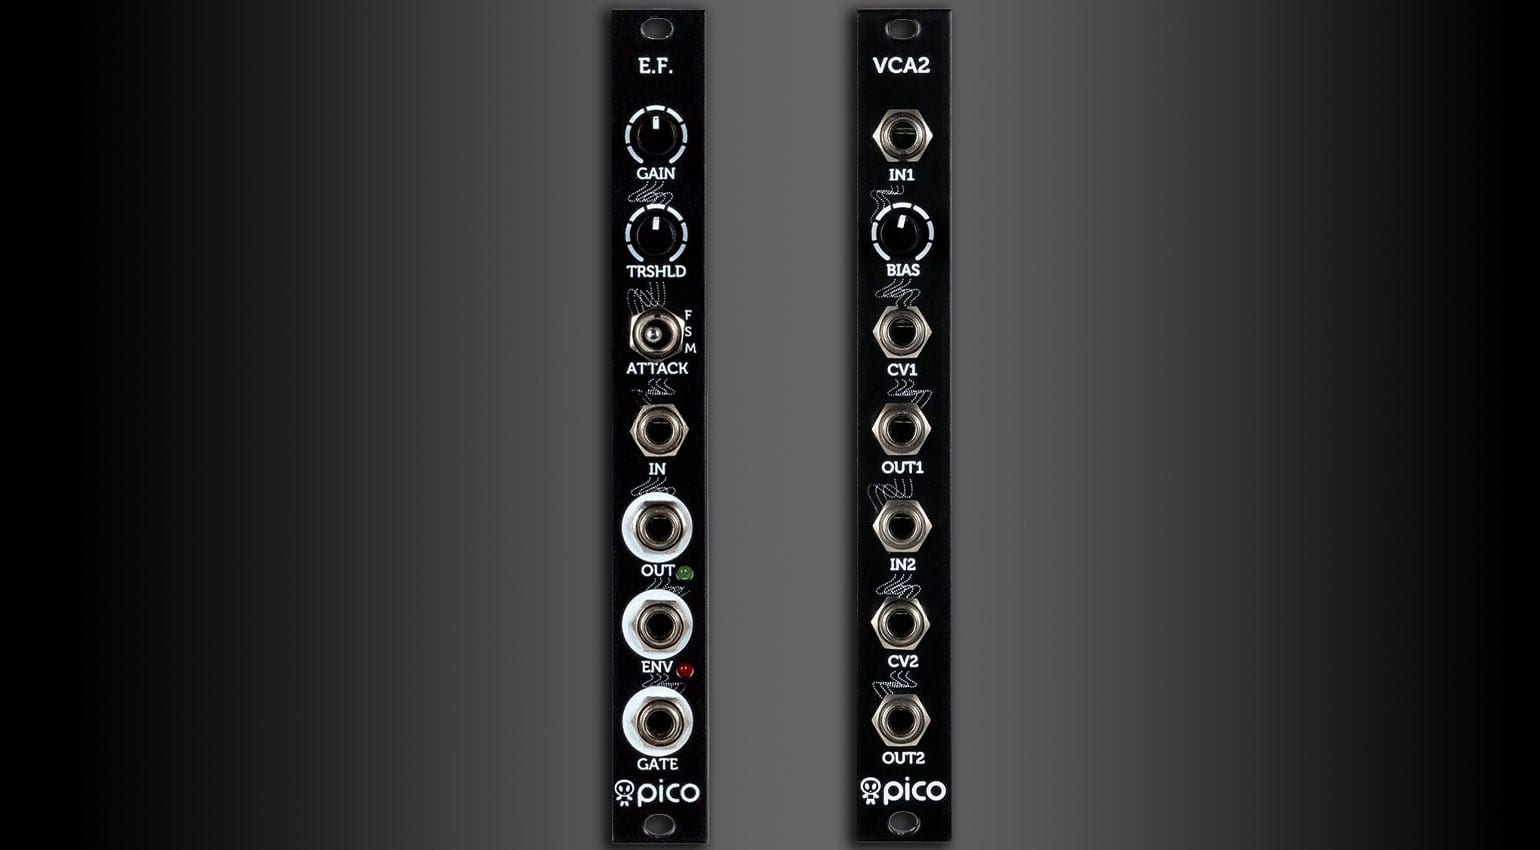 erica synths Pico VCA2 Extends Their Compact Range Instructions